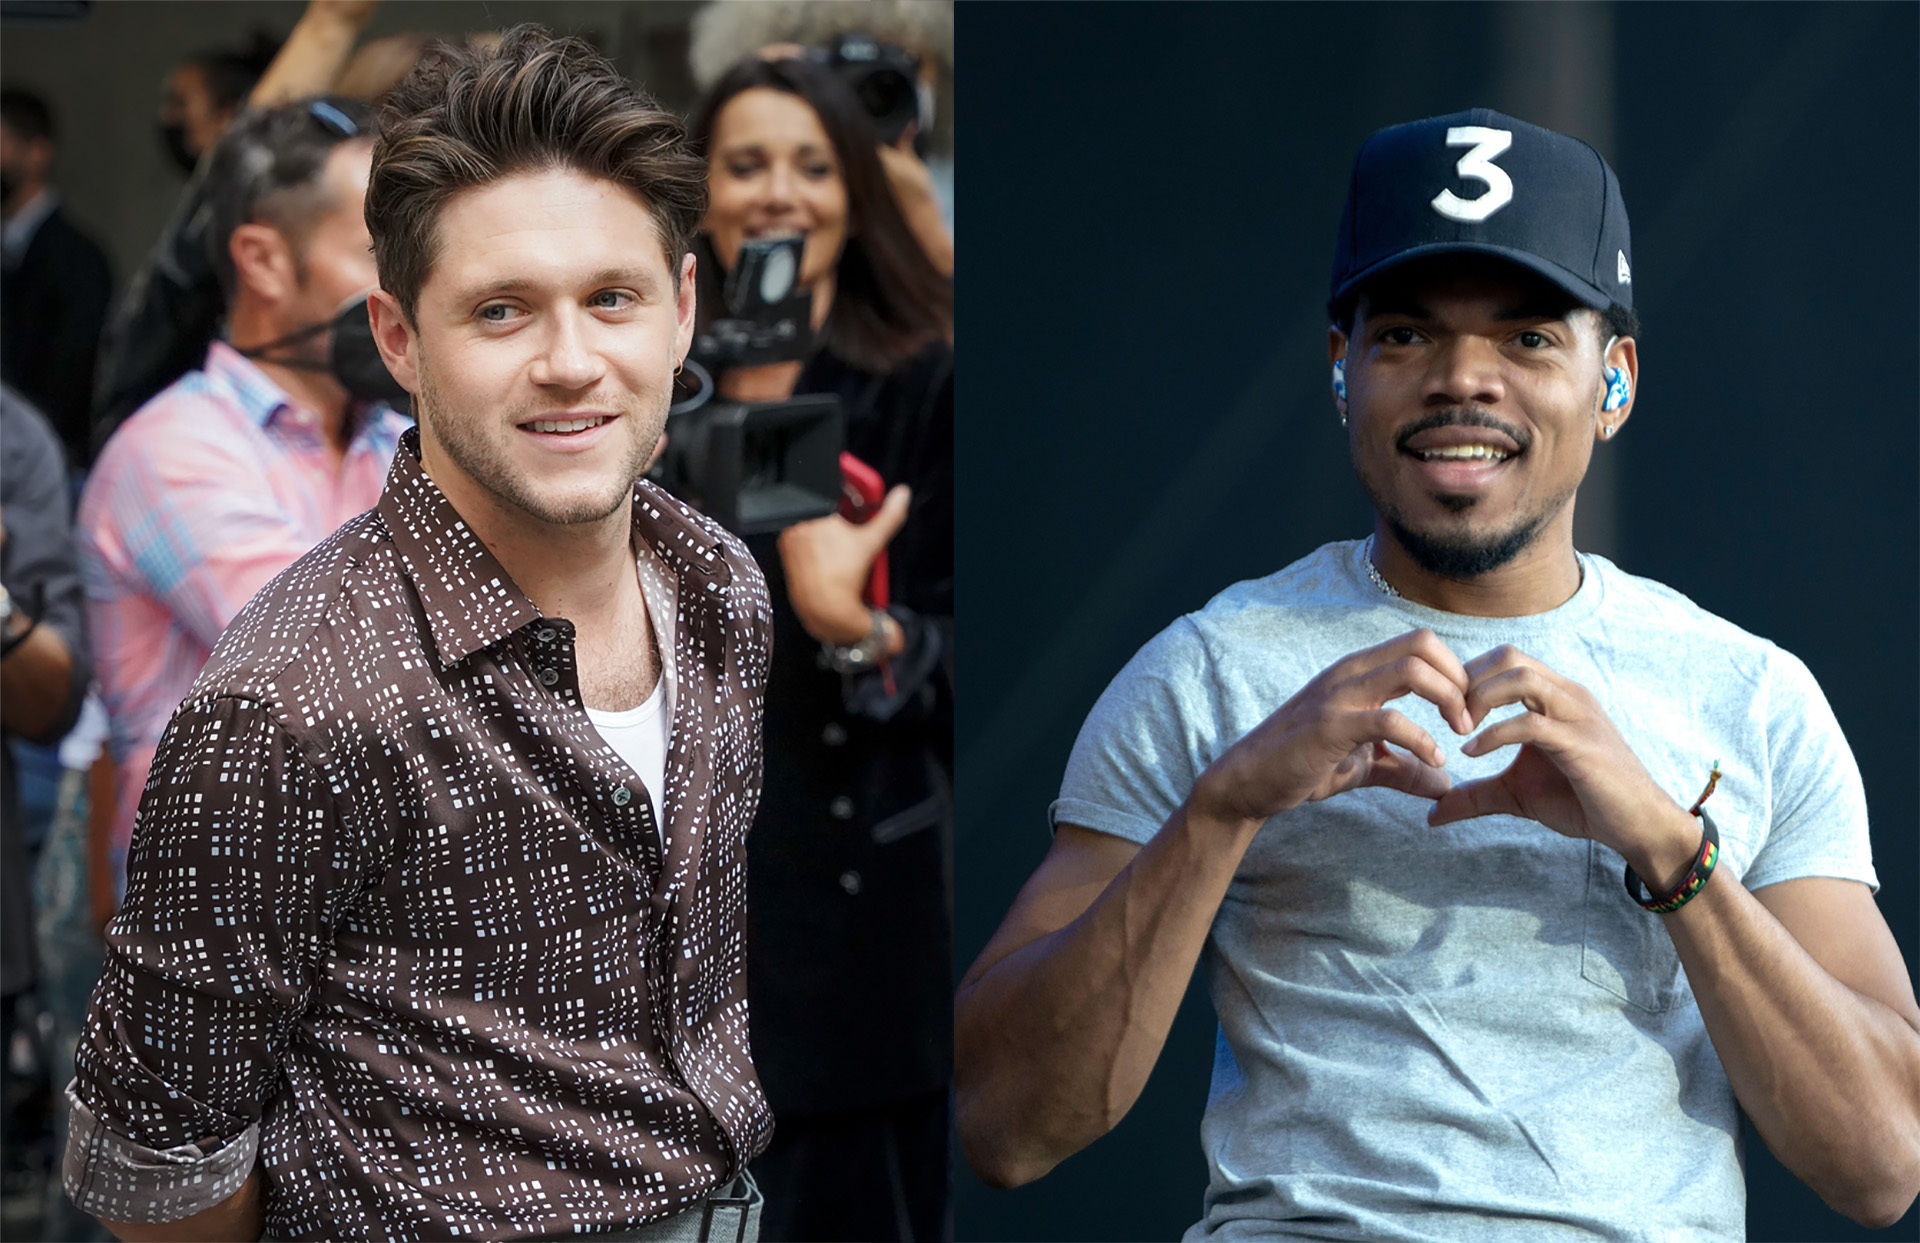 Niall Horan and Chance the Rapper Bring the Thunder to The Voice: Epic Chemistry Alert